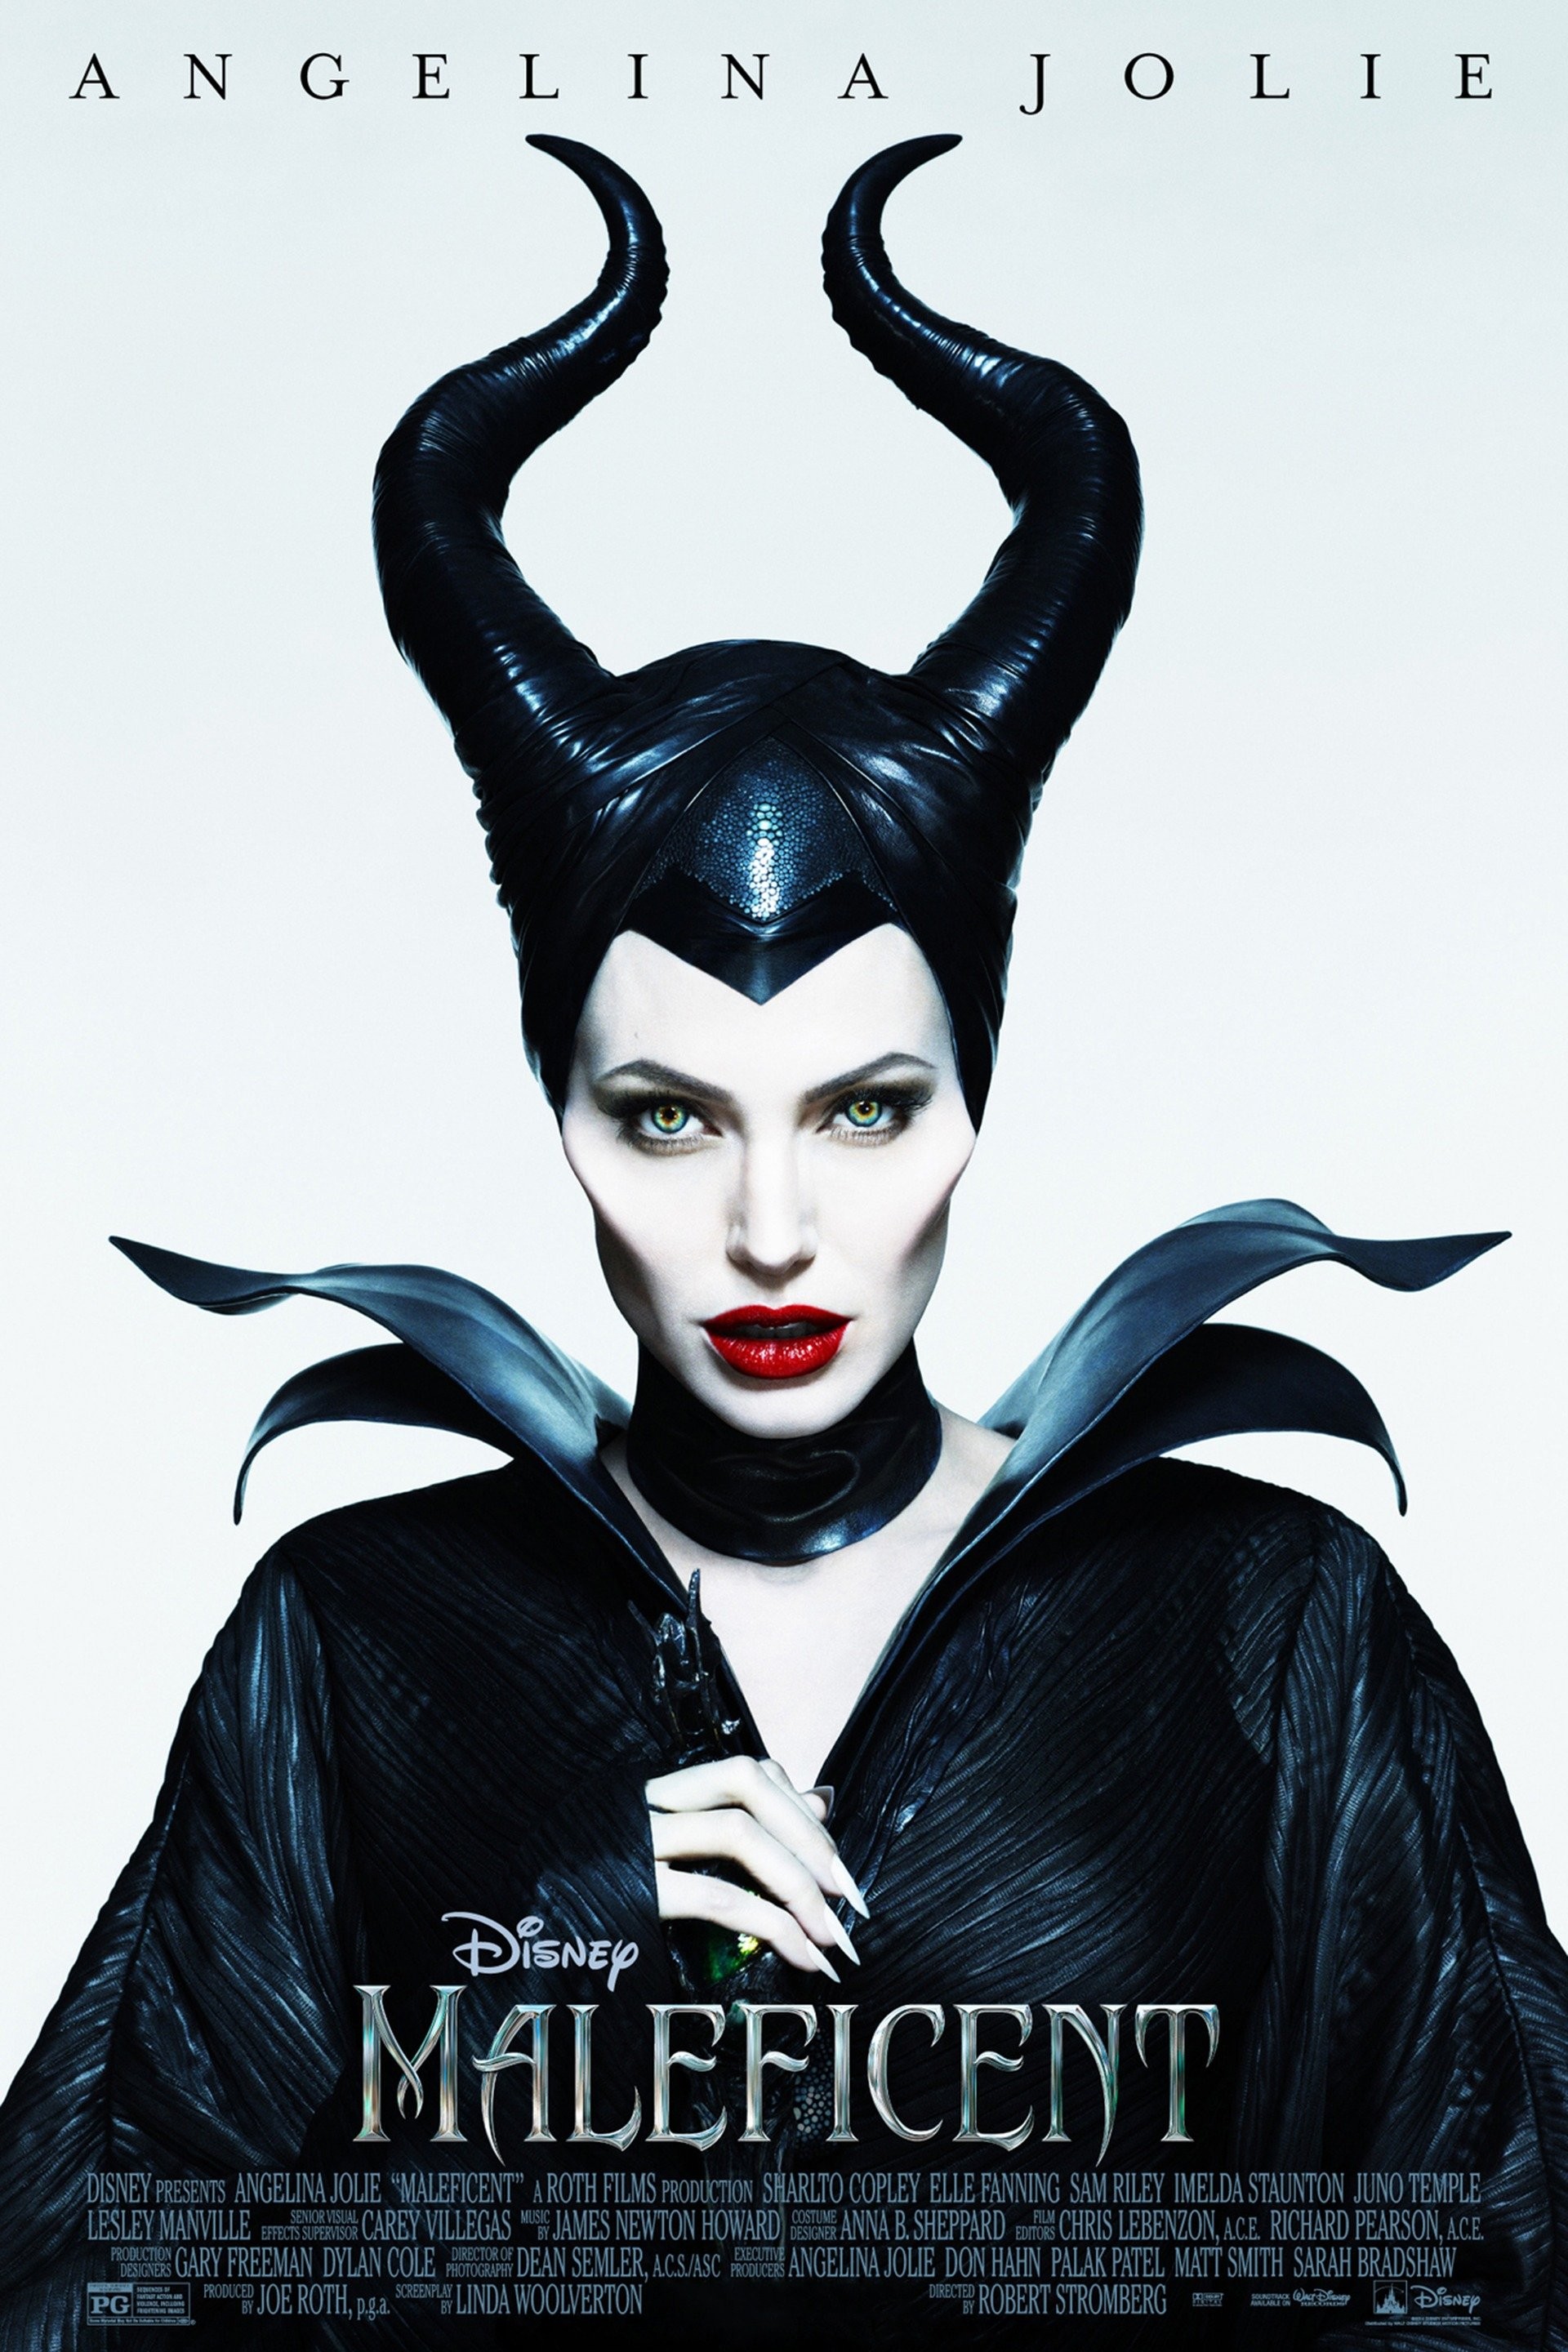 The Ultimate Villain: Why Sleeping Beauty's Maleficent is just as scary  over 50 years on, Films, Entertainment